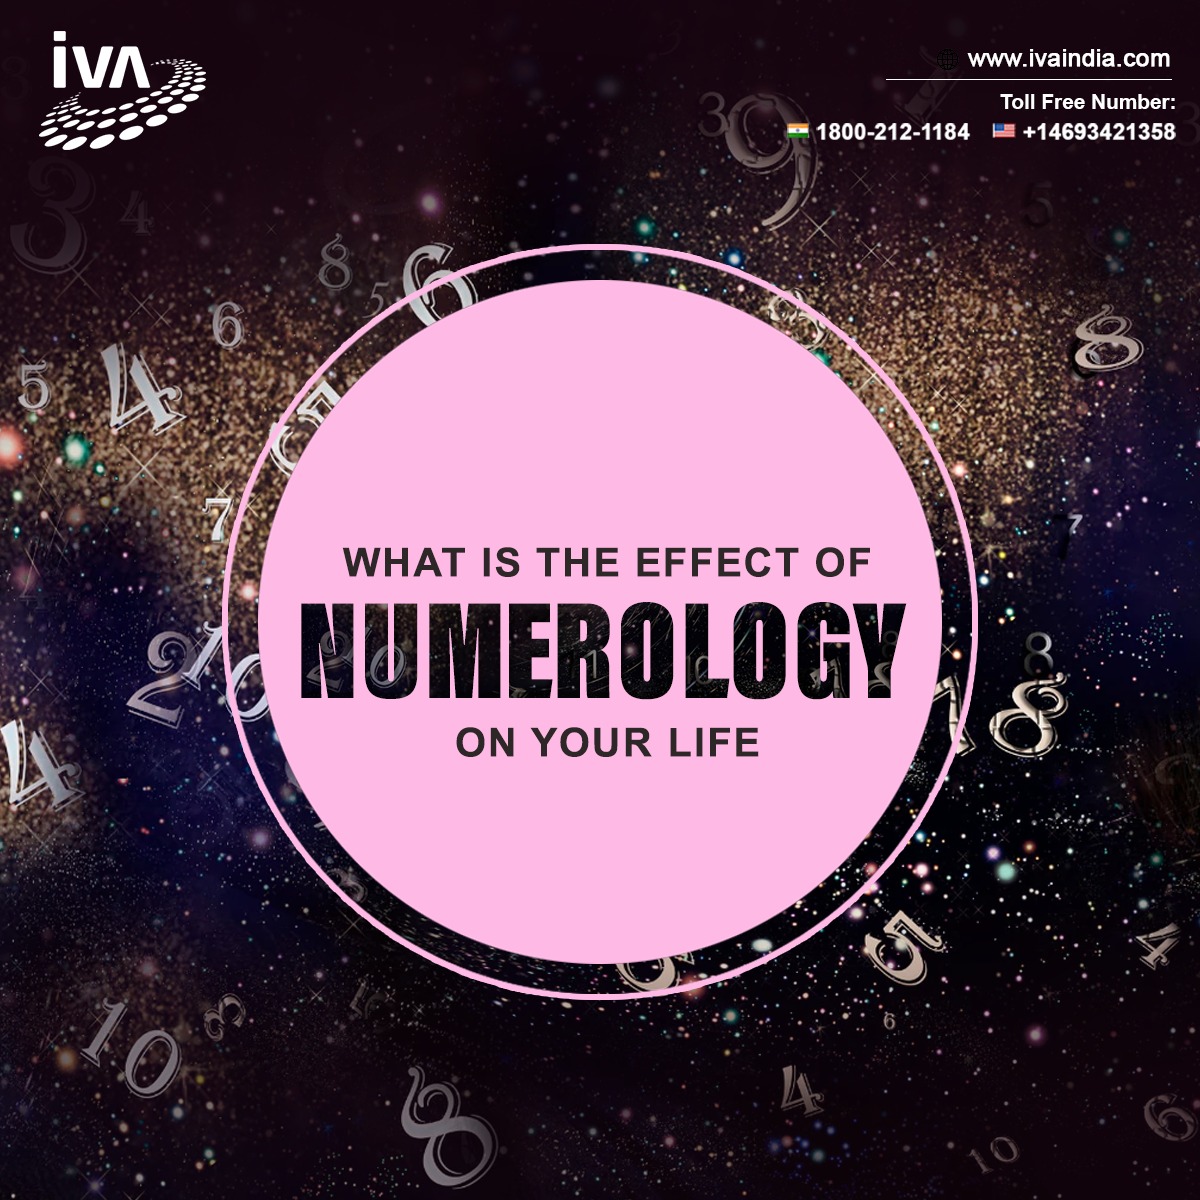 What Is The Effect Of Numerology On Your Life?